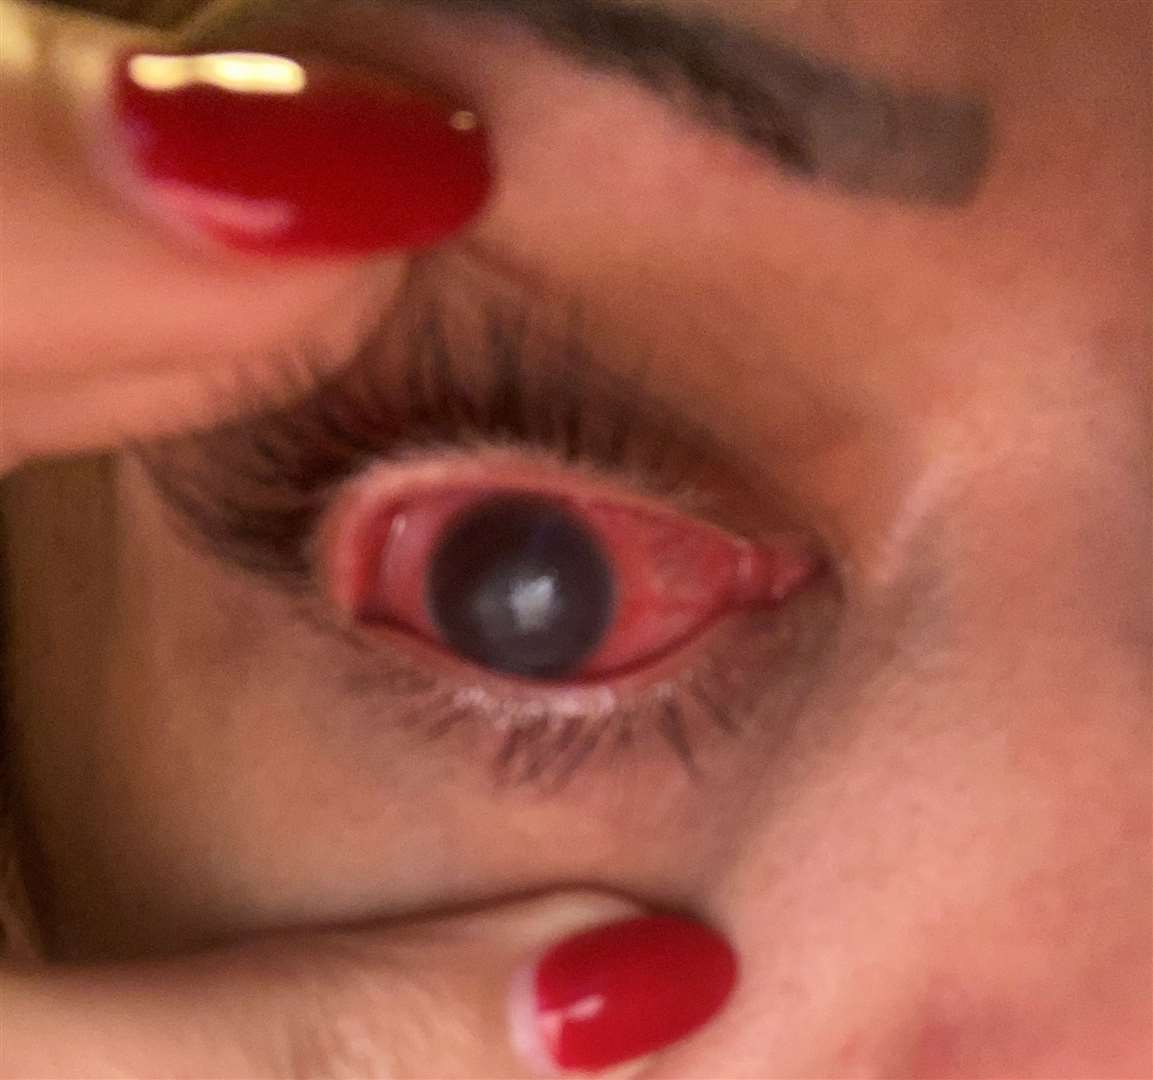 Shereen-Fay Griffin says she woke up blind in one eye. Photo credit: SWNS